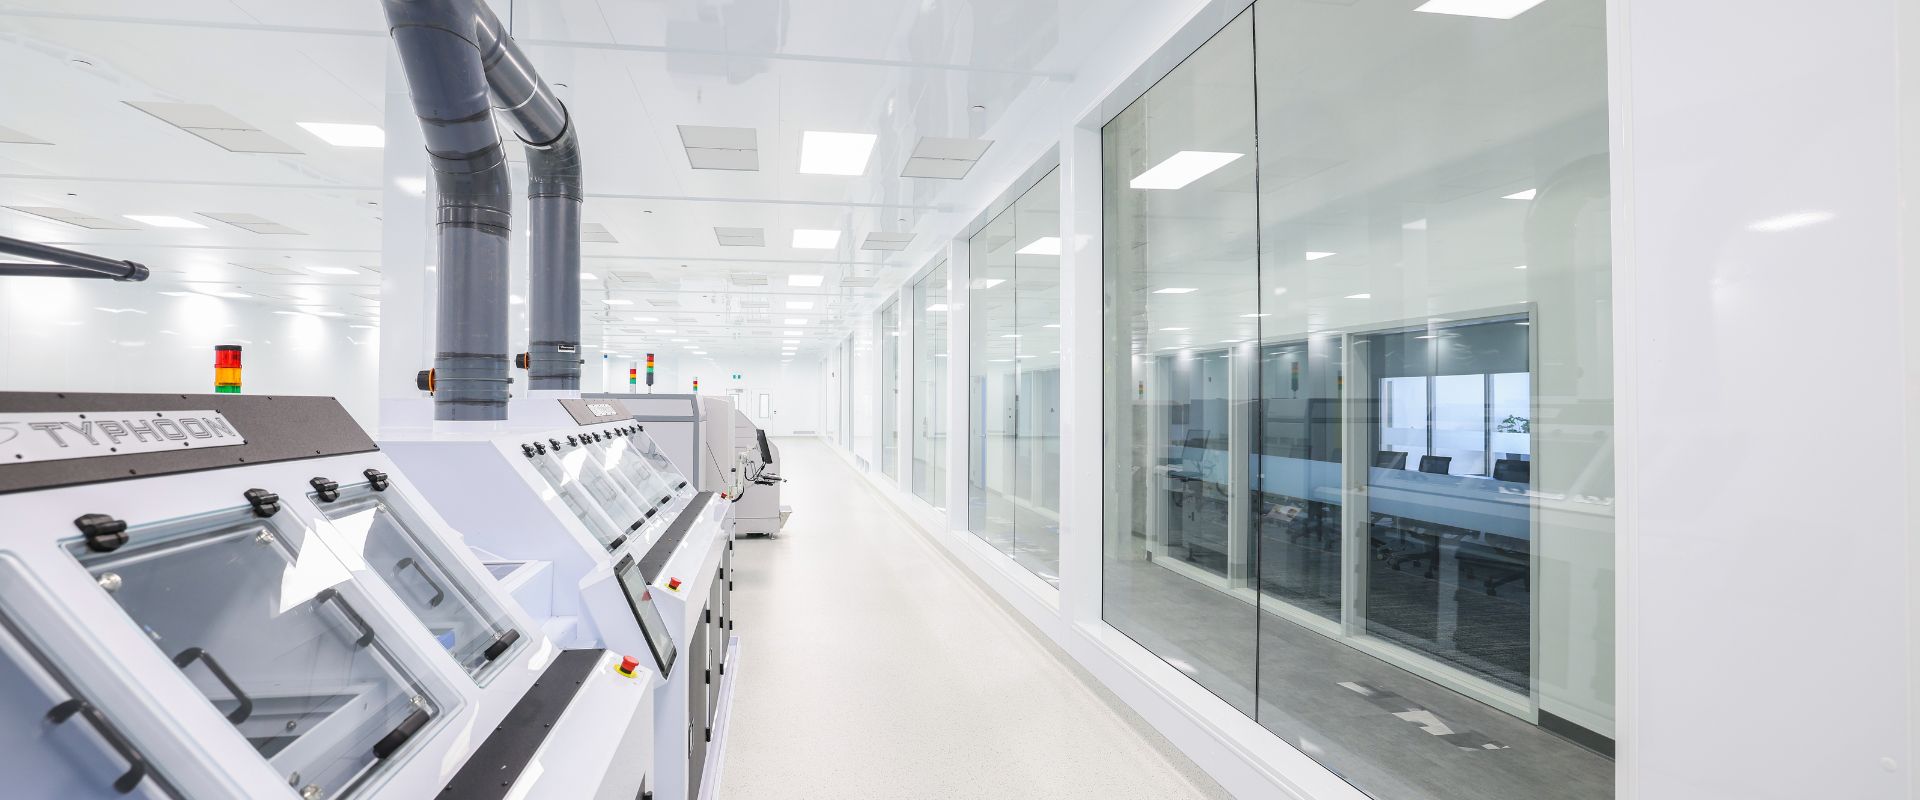 Class 10,000 Clean Room for SMT Manufacturing in a Semiconductor Fab (2)